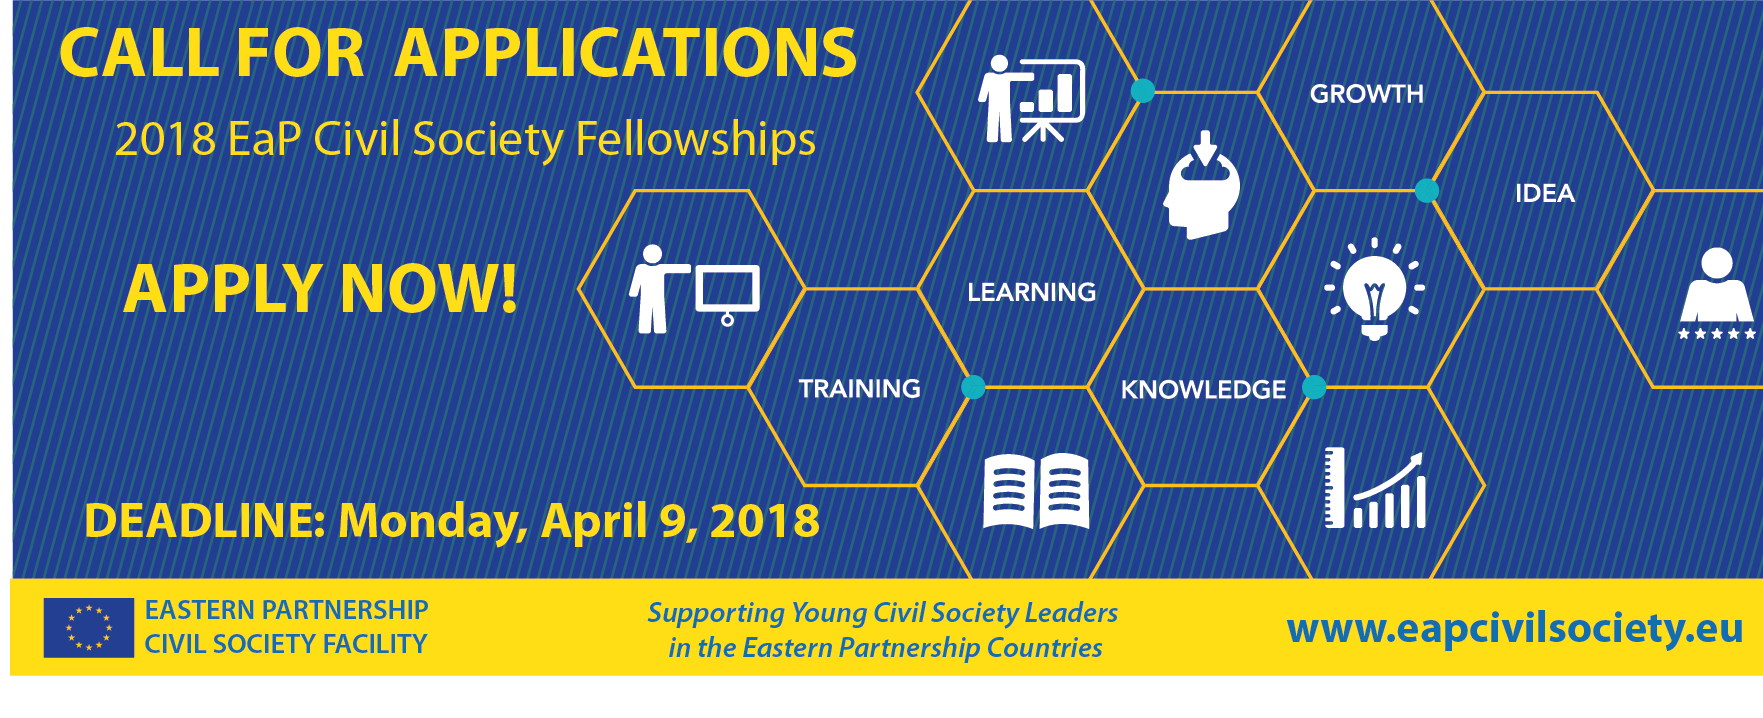 Call for Applications under 2018 EaP Civil Society Fellowships Supporting Young Civil Society Leaders in Eastern Partnership Countries